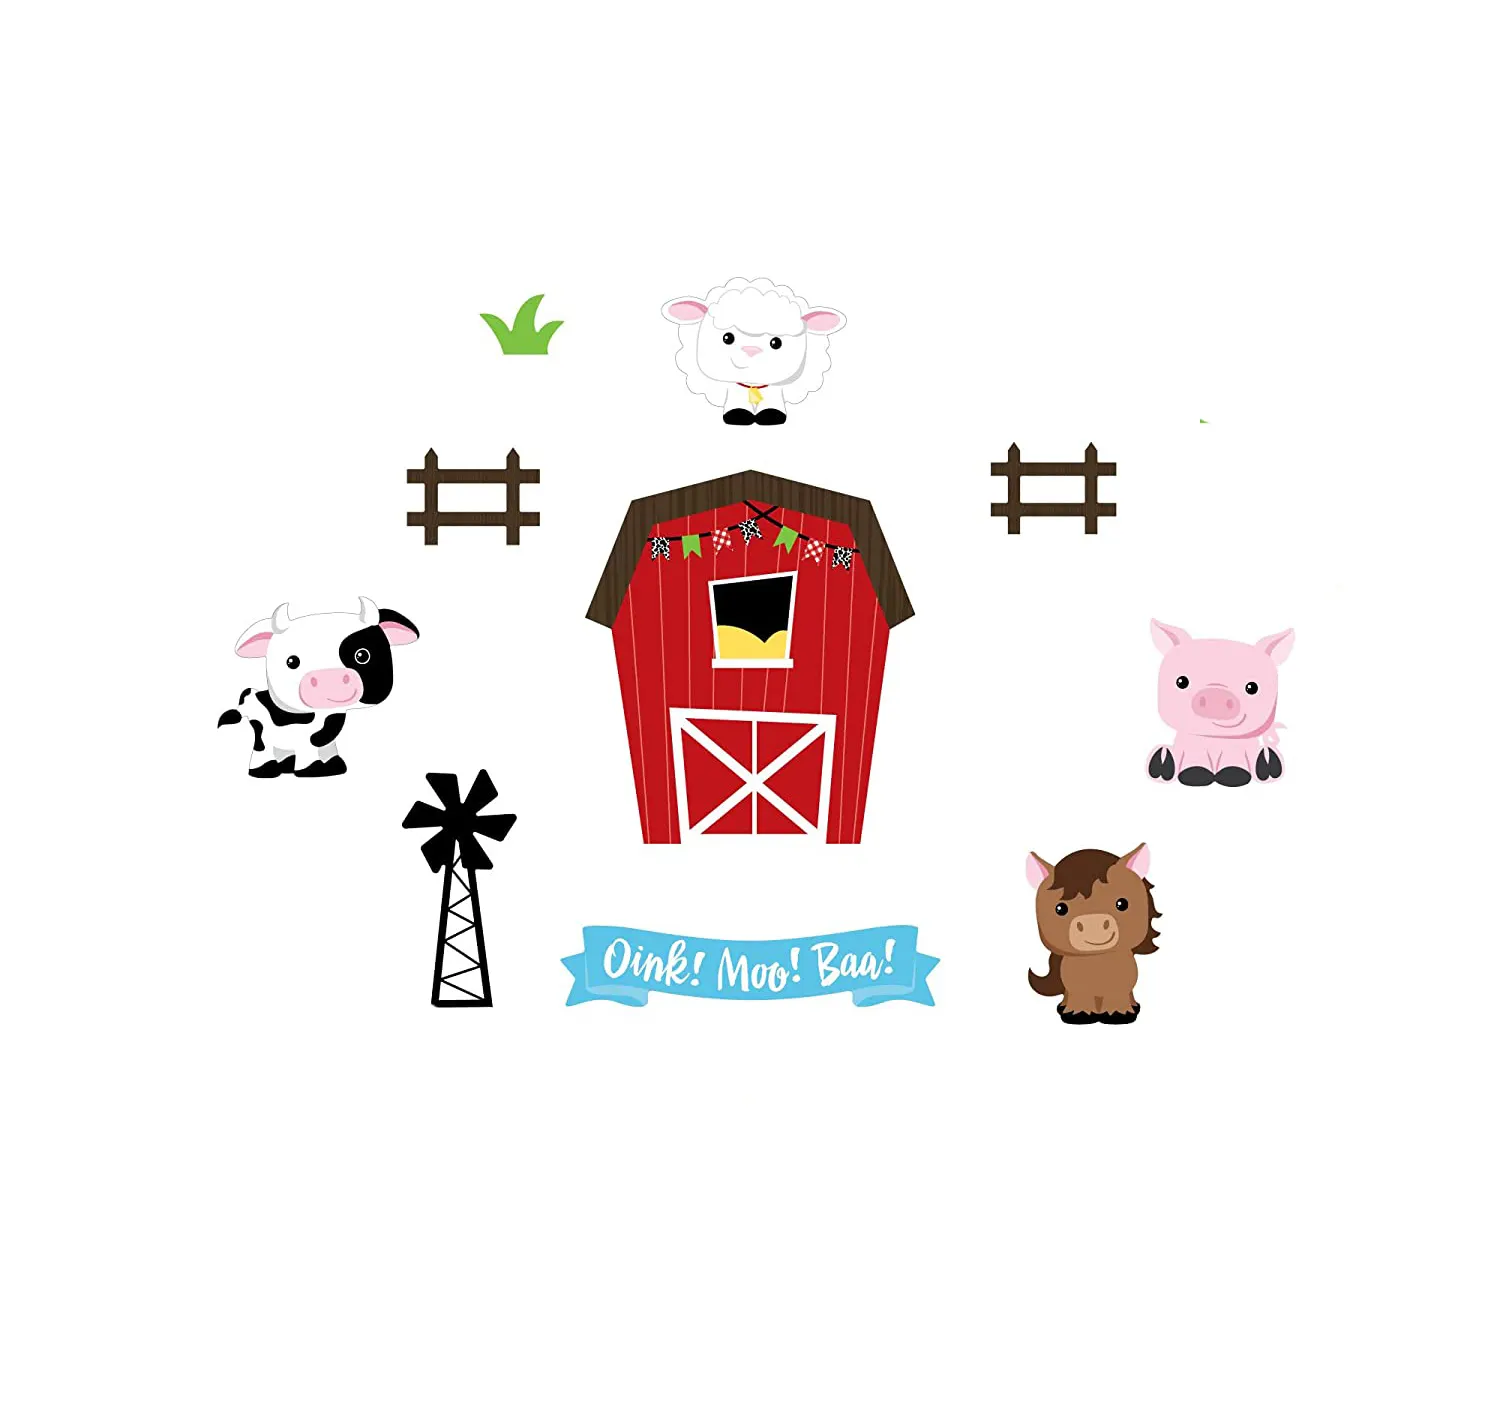 Farm Animals - Strip And Paste Vinyl Wall Art Stickers For Kindergarten And Children's Rooms